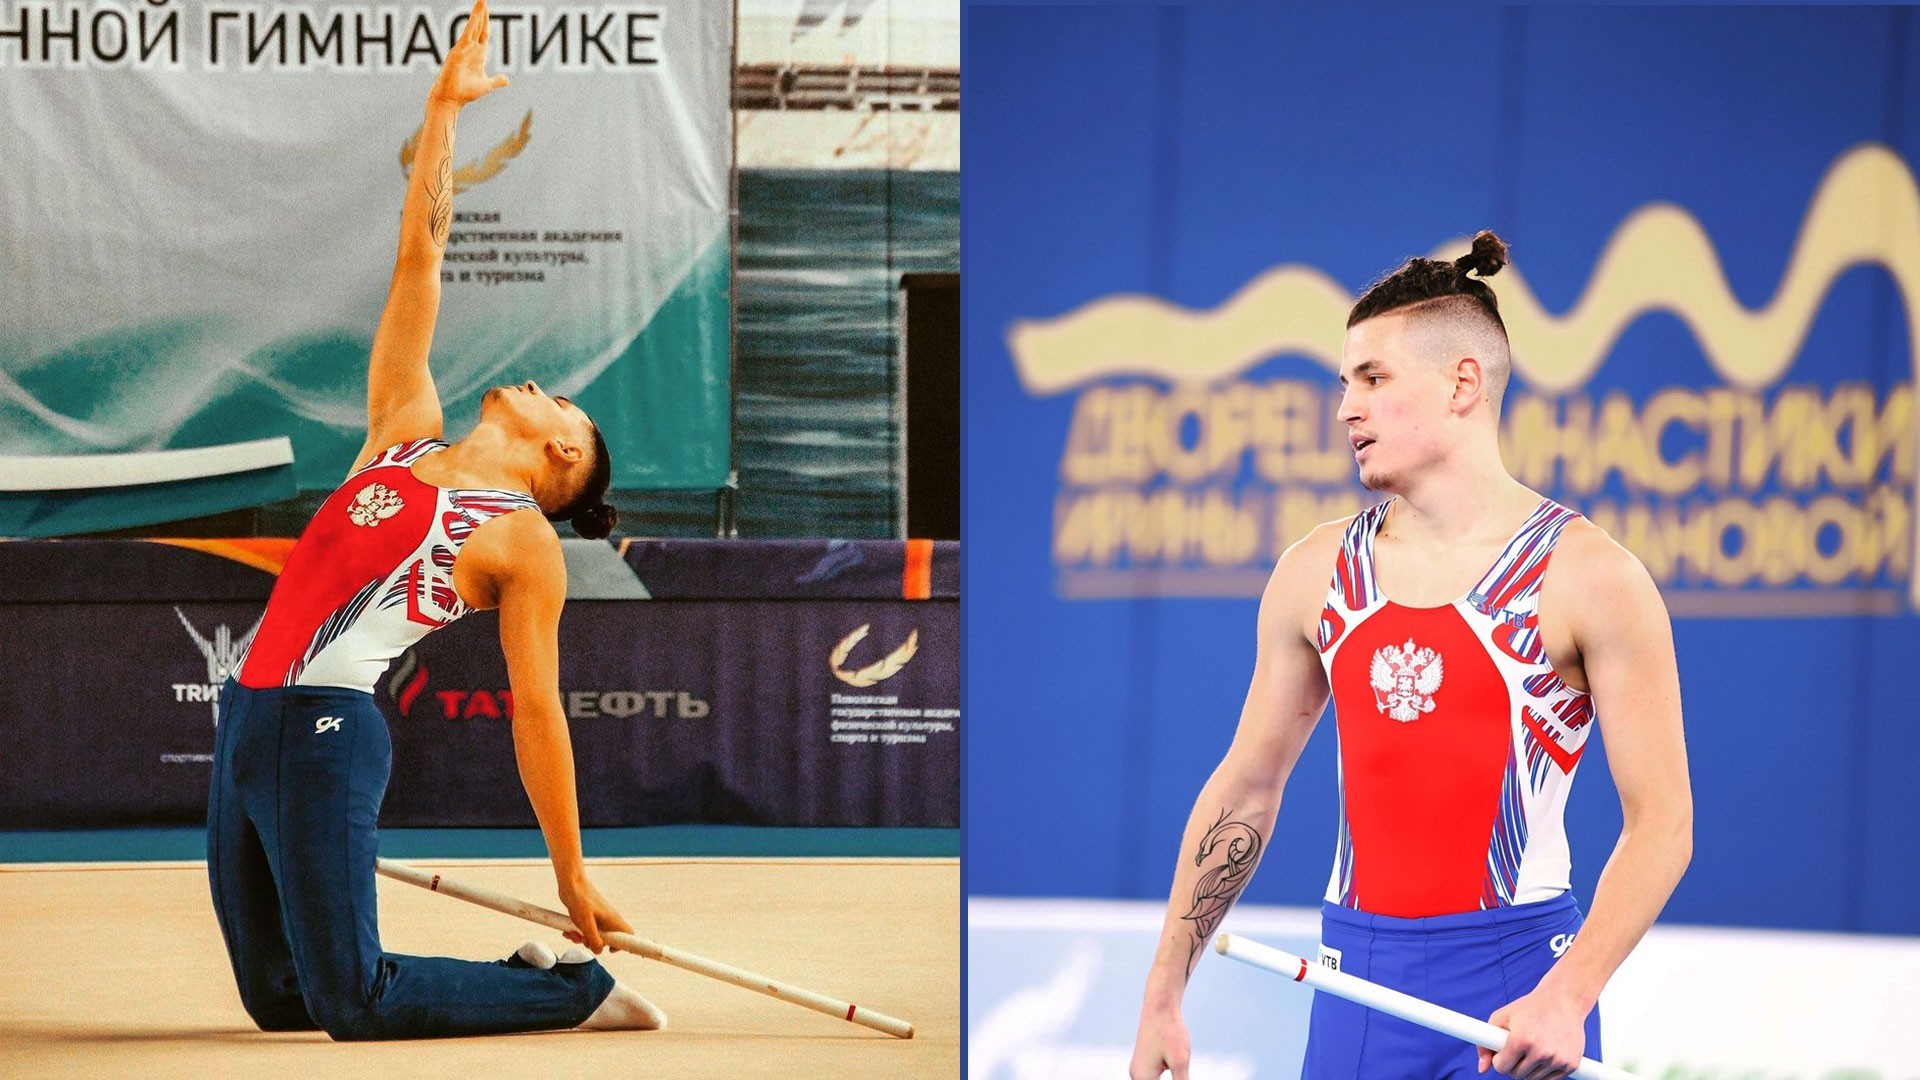 Men's rhythmic gymnastics is on the rise in Russia - despite the haters  (PHOTOS+VIDEOS) - Russia Beyond